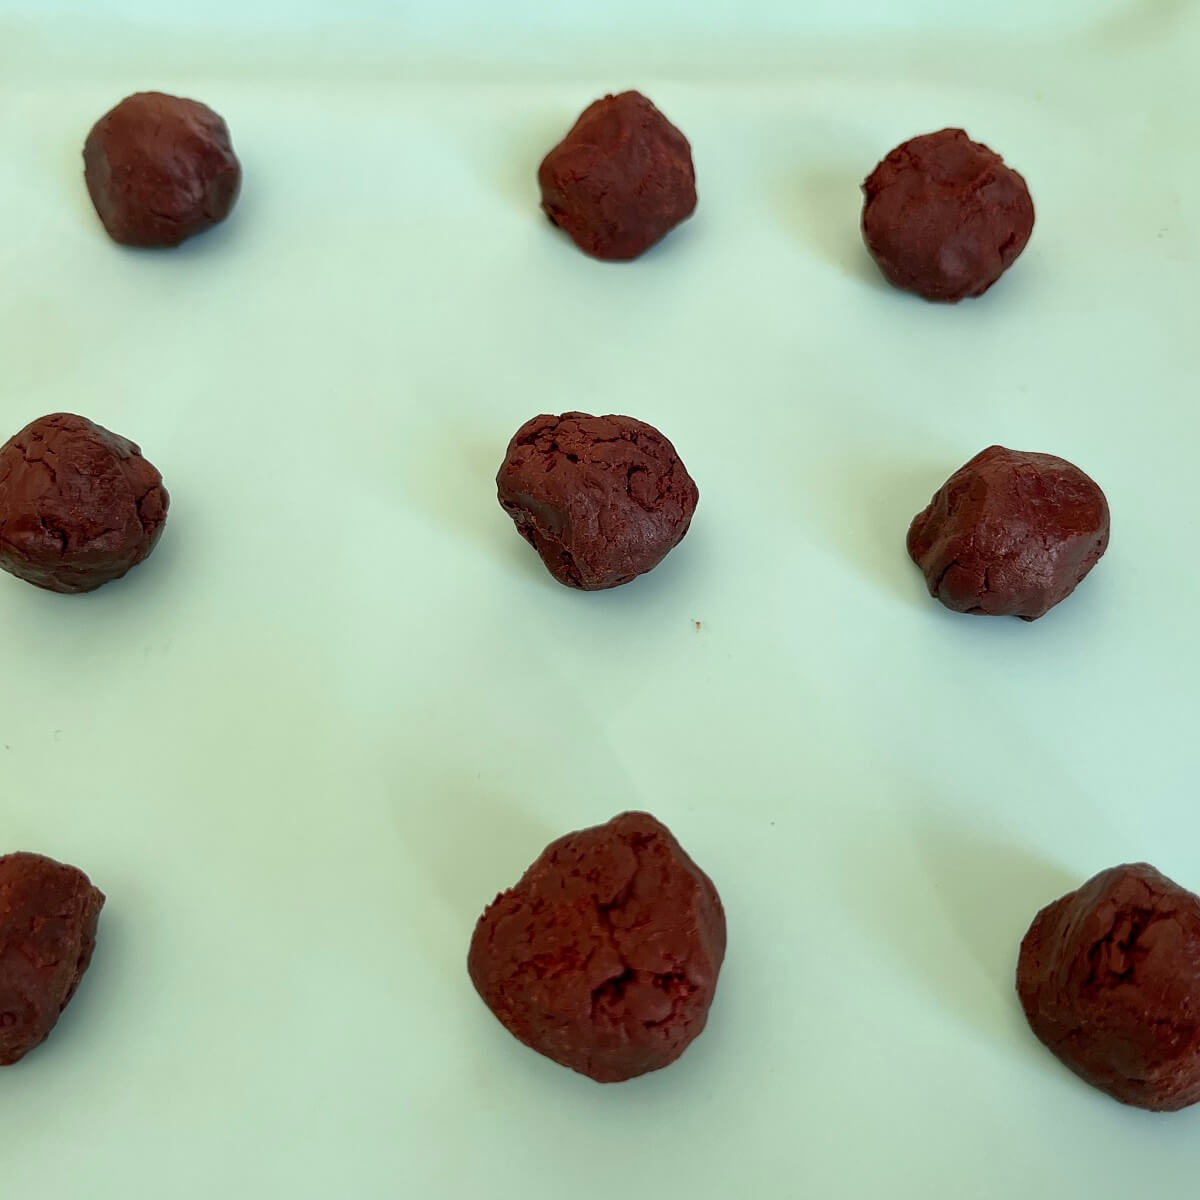 Rose water chocolate balls on a silicone baking mat.